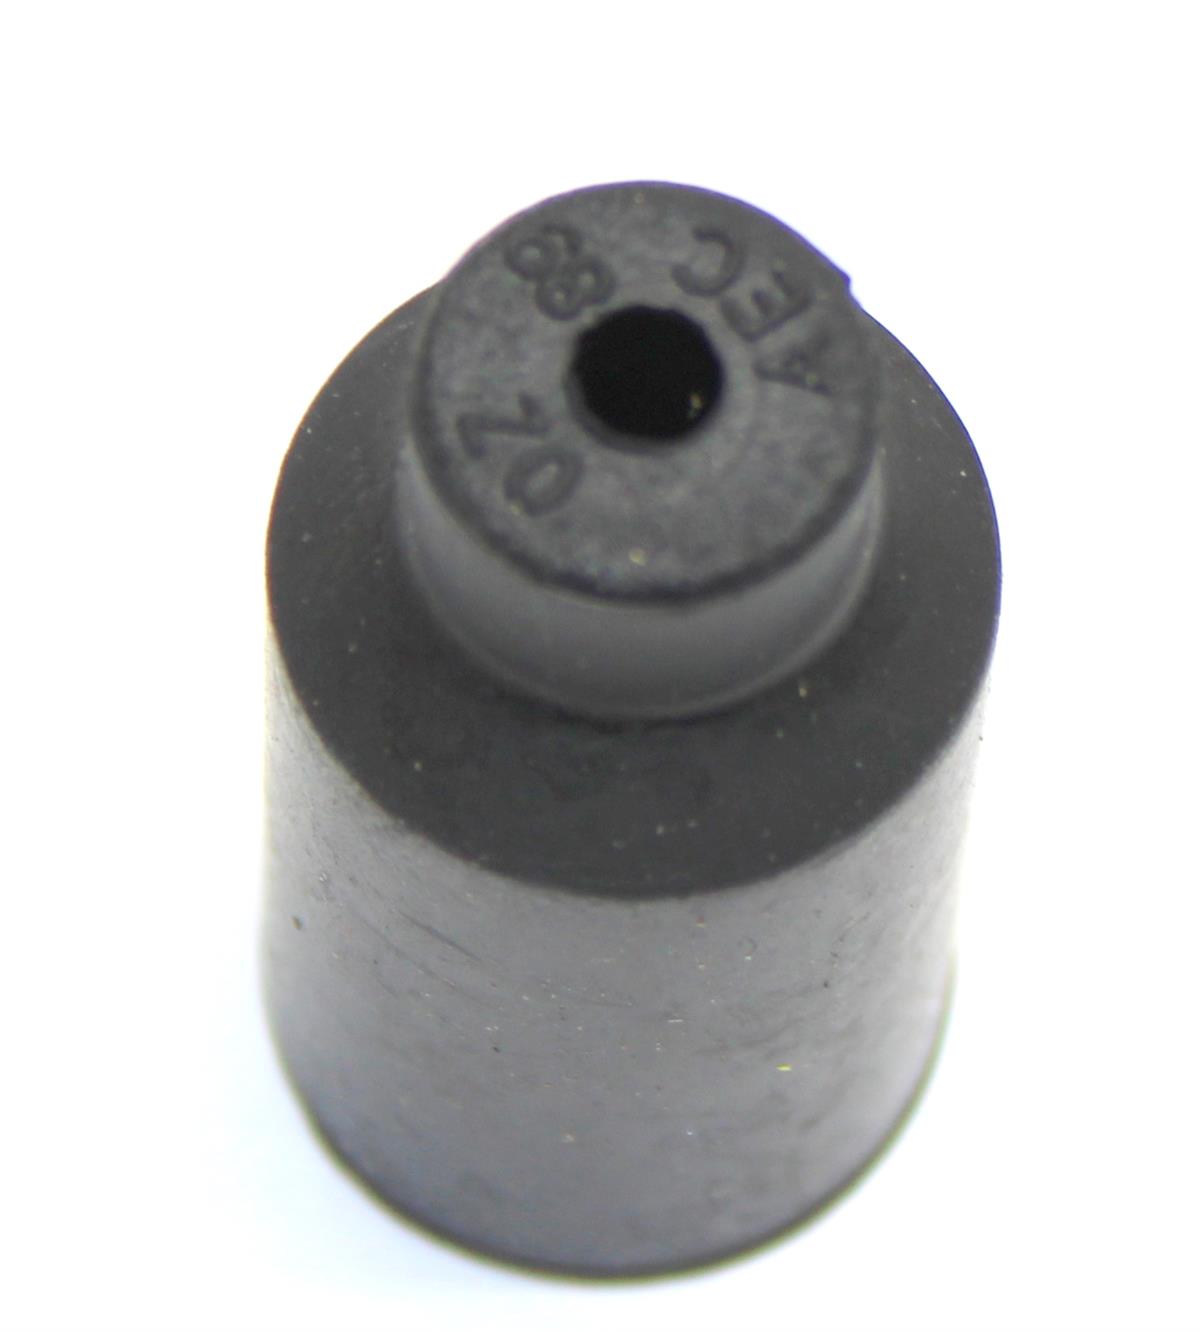 ALL-5405 | ALL-5405 Female 14 Gauge Wire Electrical Plug Connector Common Application (12).JPG